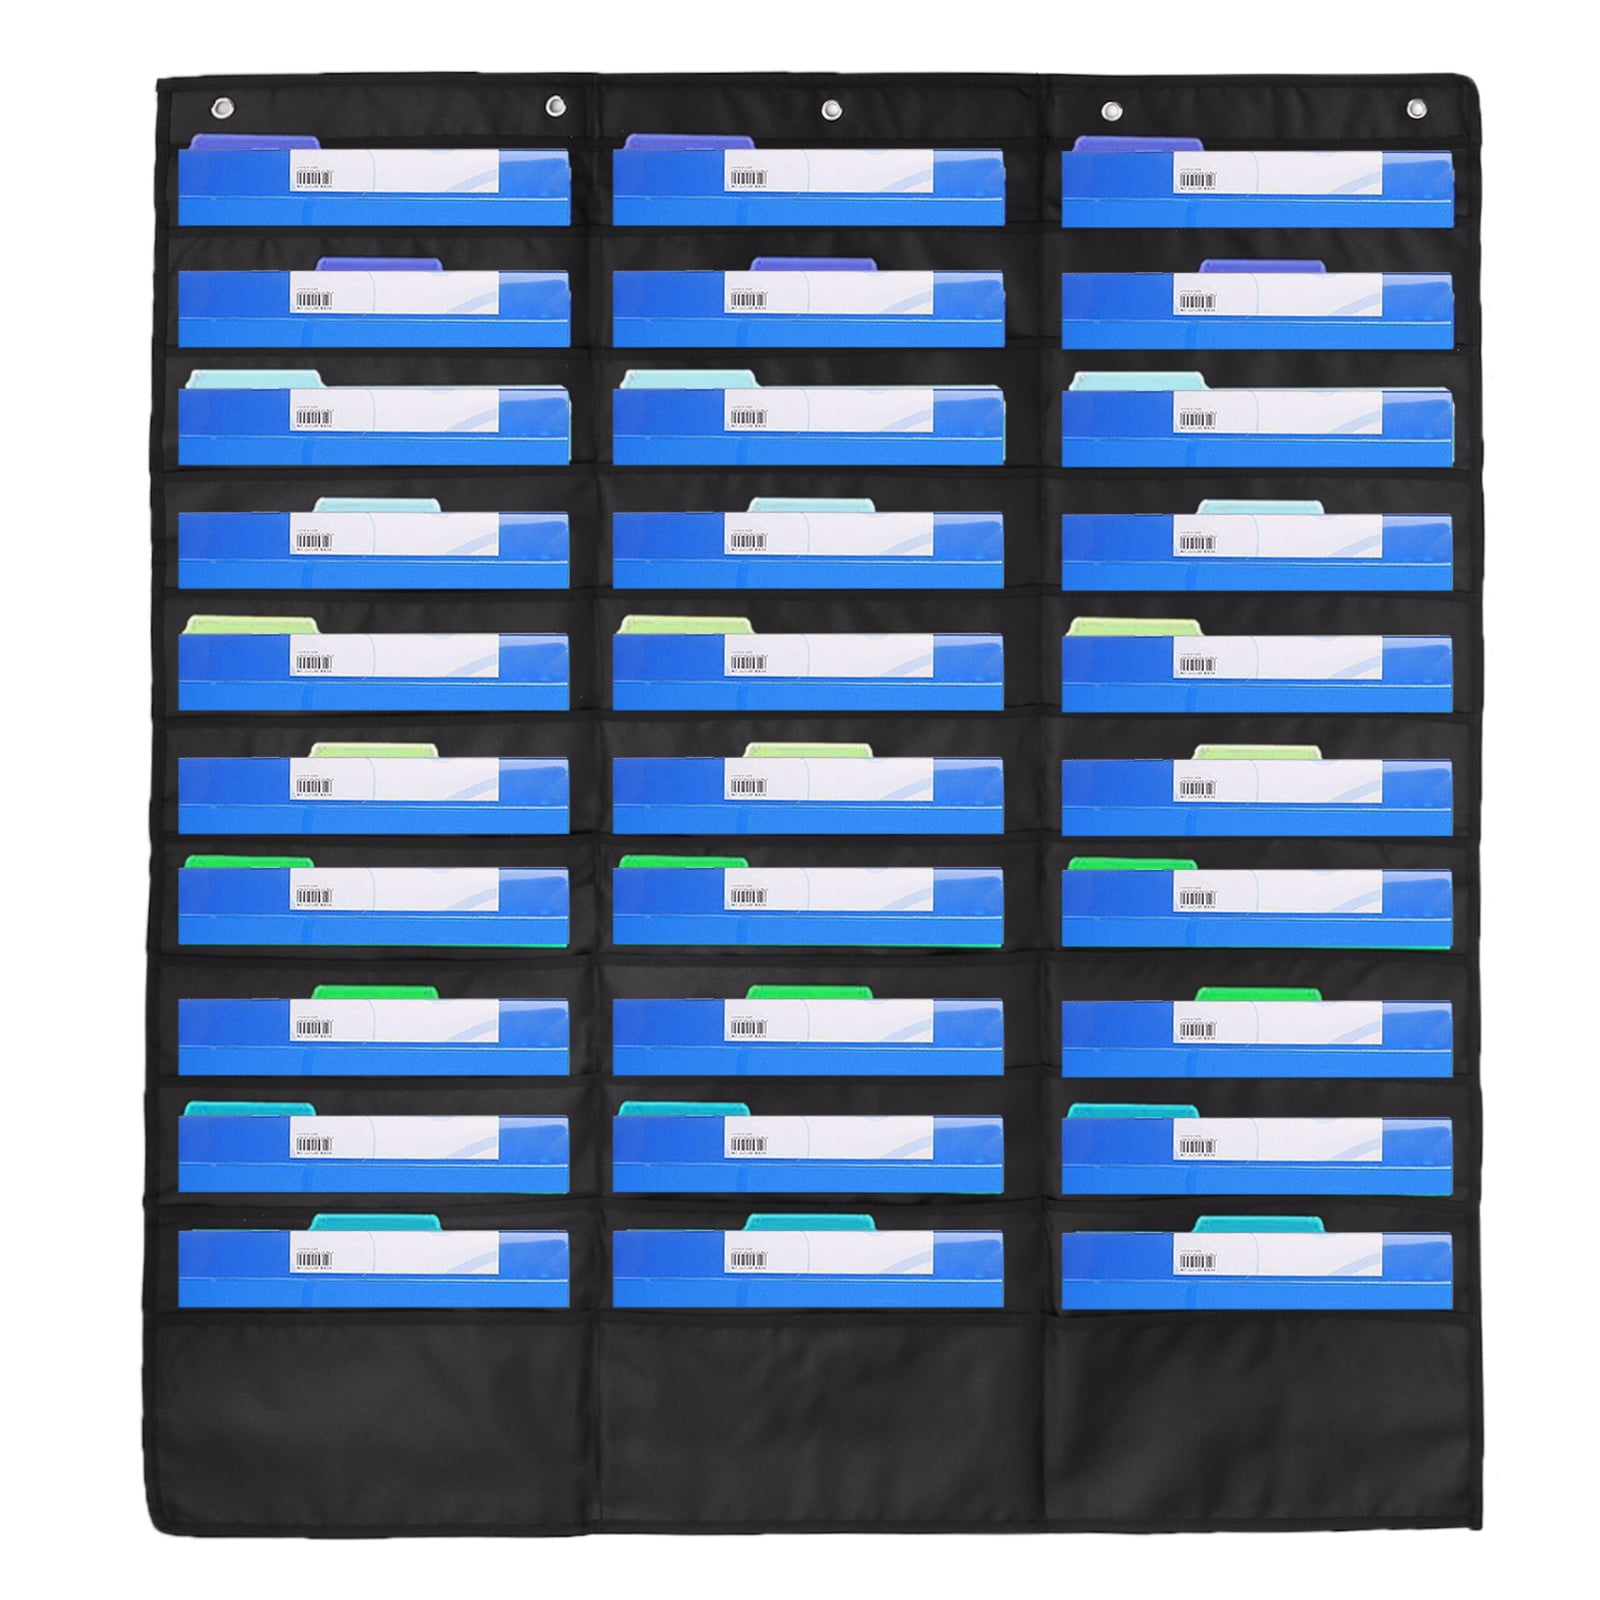 Blue Hanging Wall File Organizer， 5 Pockets Heavy Duty Storage Pocket Chart Included 4 Over Door matel Hangers Scrapbook Papers & More Files Organize Your Assignments 